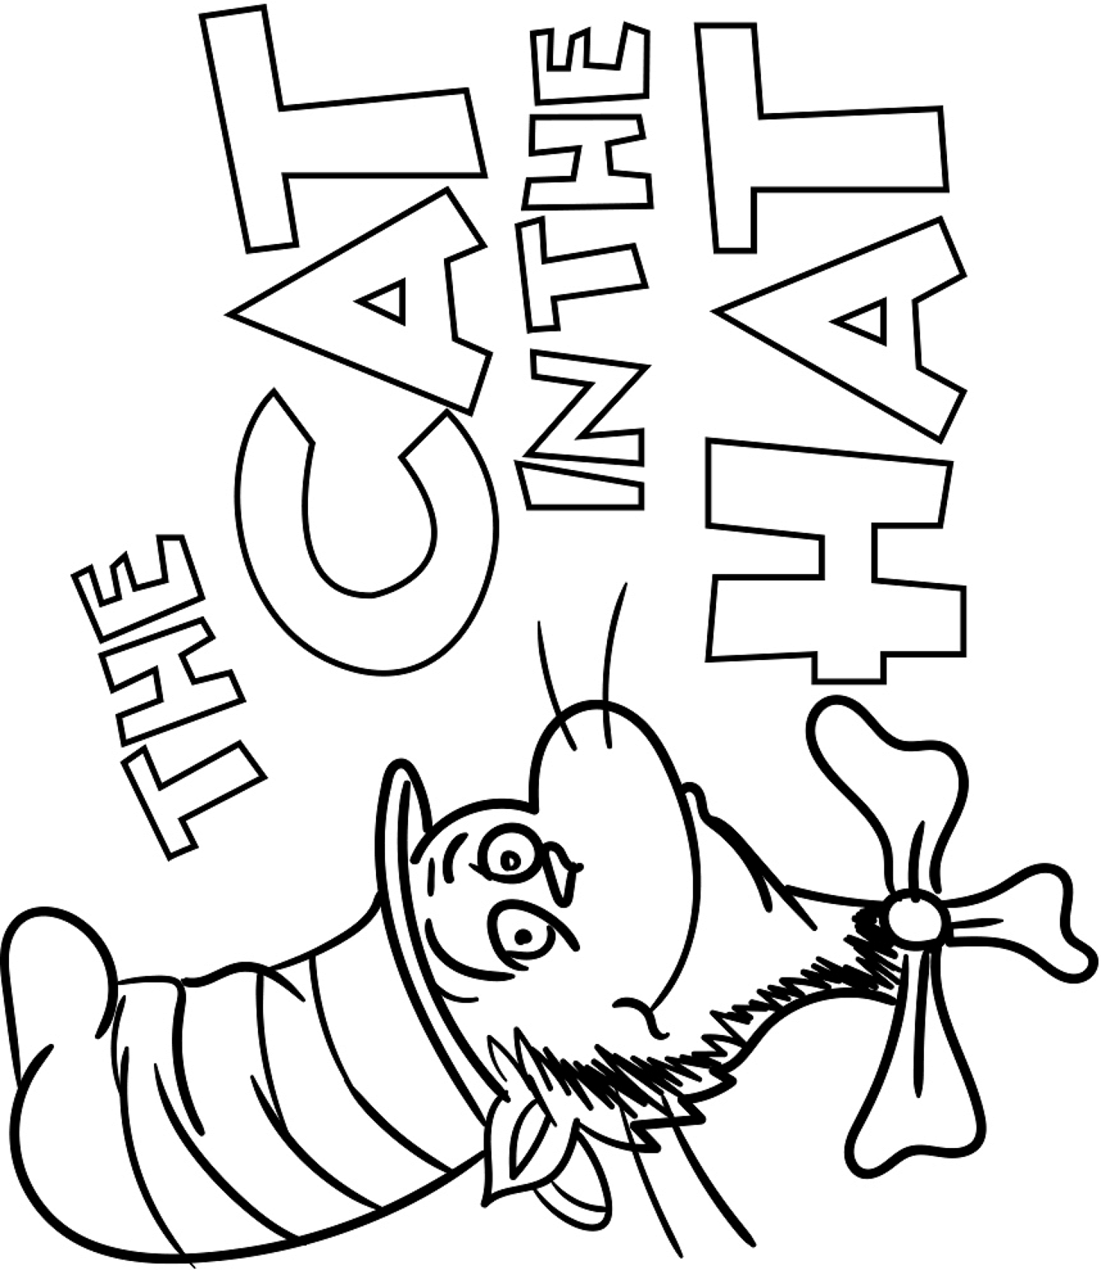 460-collections-coloring-pages-of-cat-in-the-hat-latest-coloring